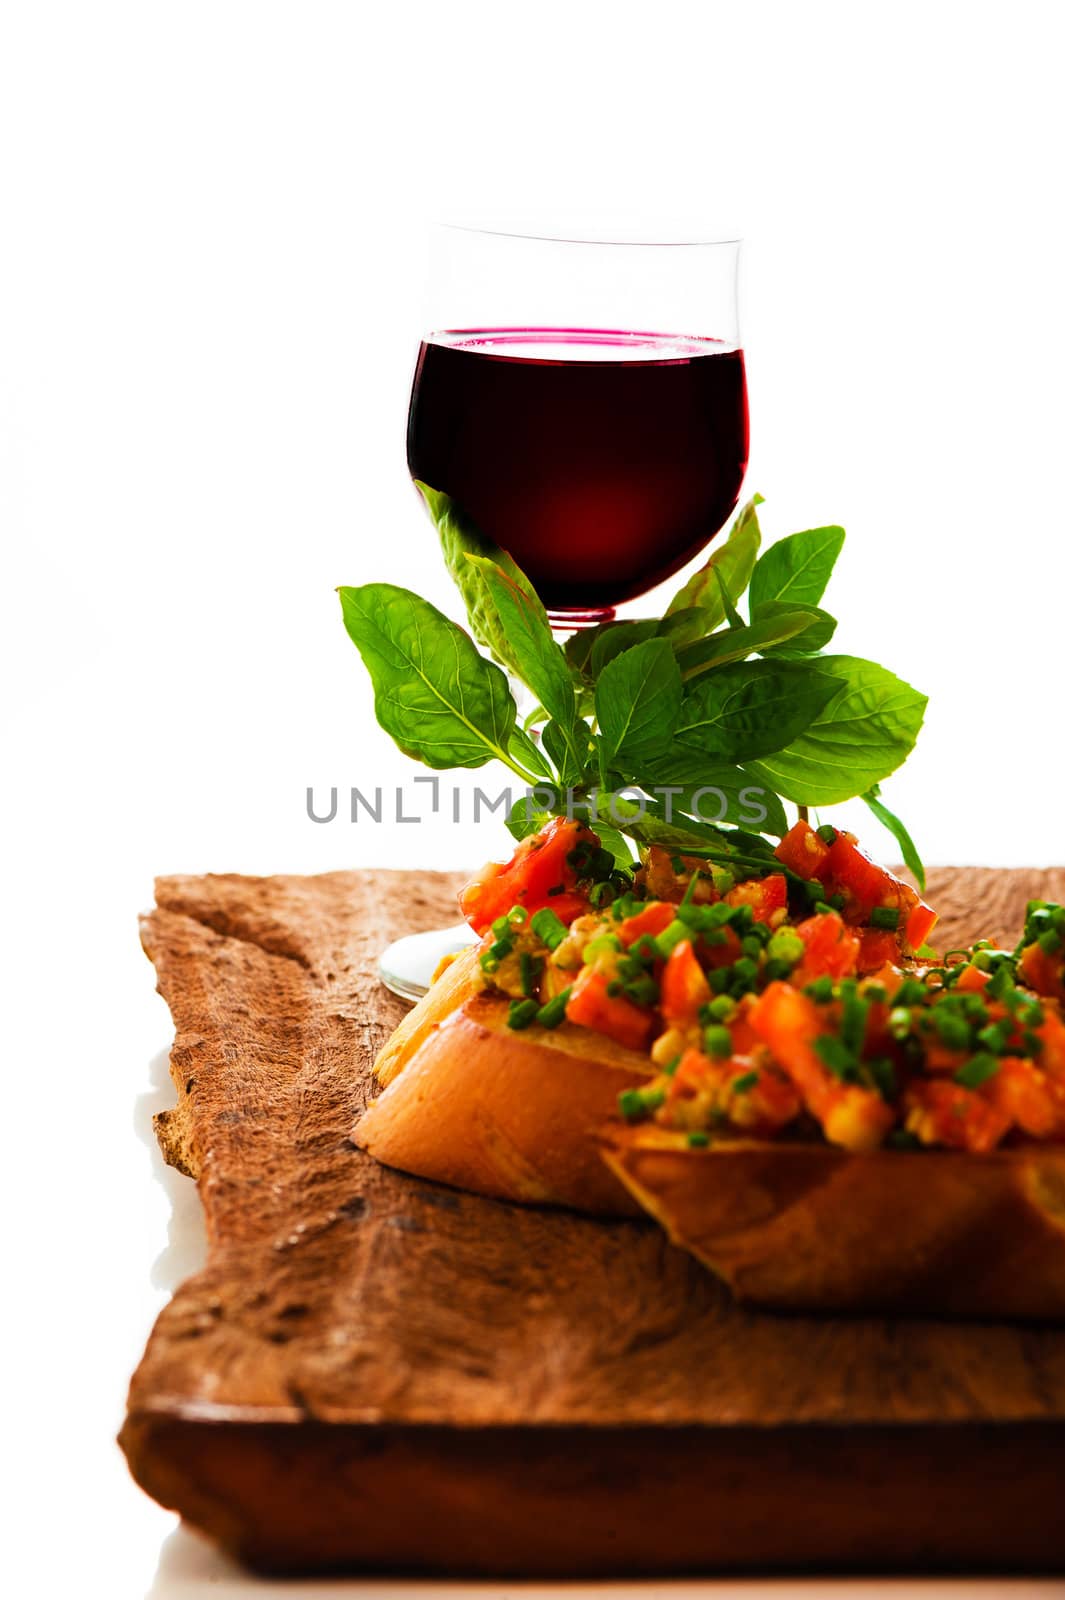 delicious bruschetta appetizer with red wine glass on wooden board